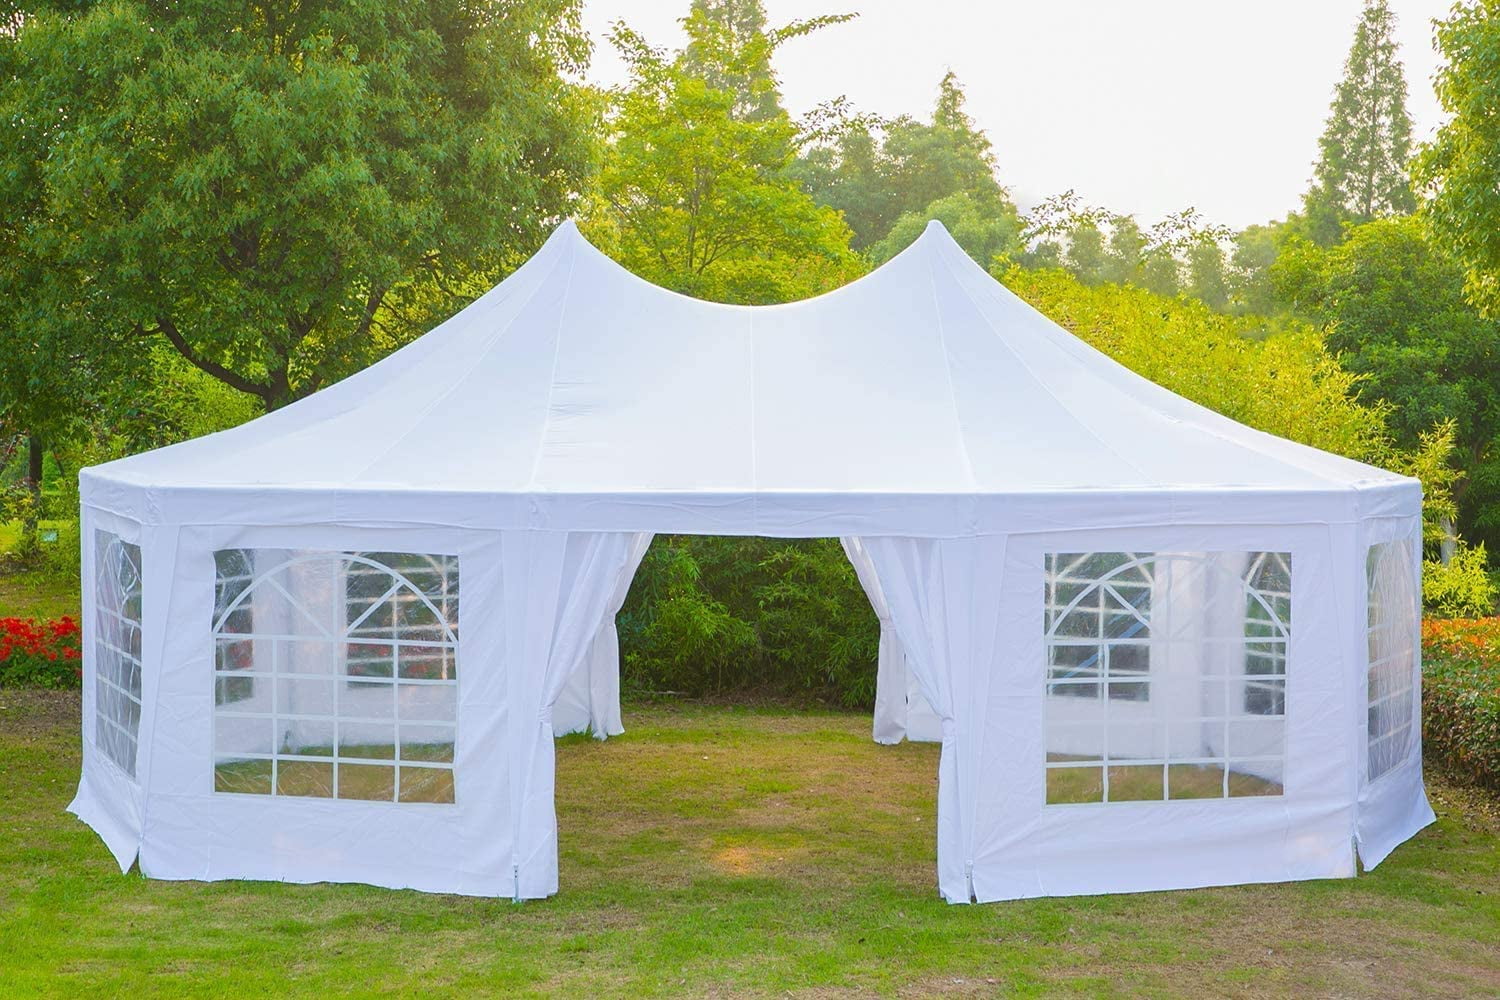 LEMY 10 X 30 Outdoor Wedding Party Tent Camping Shelter Gazebo Canopy with Removable Sidewalls Easy Set Gazebo BBQ Pavilion Canopy Cater Events